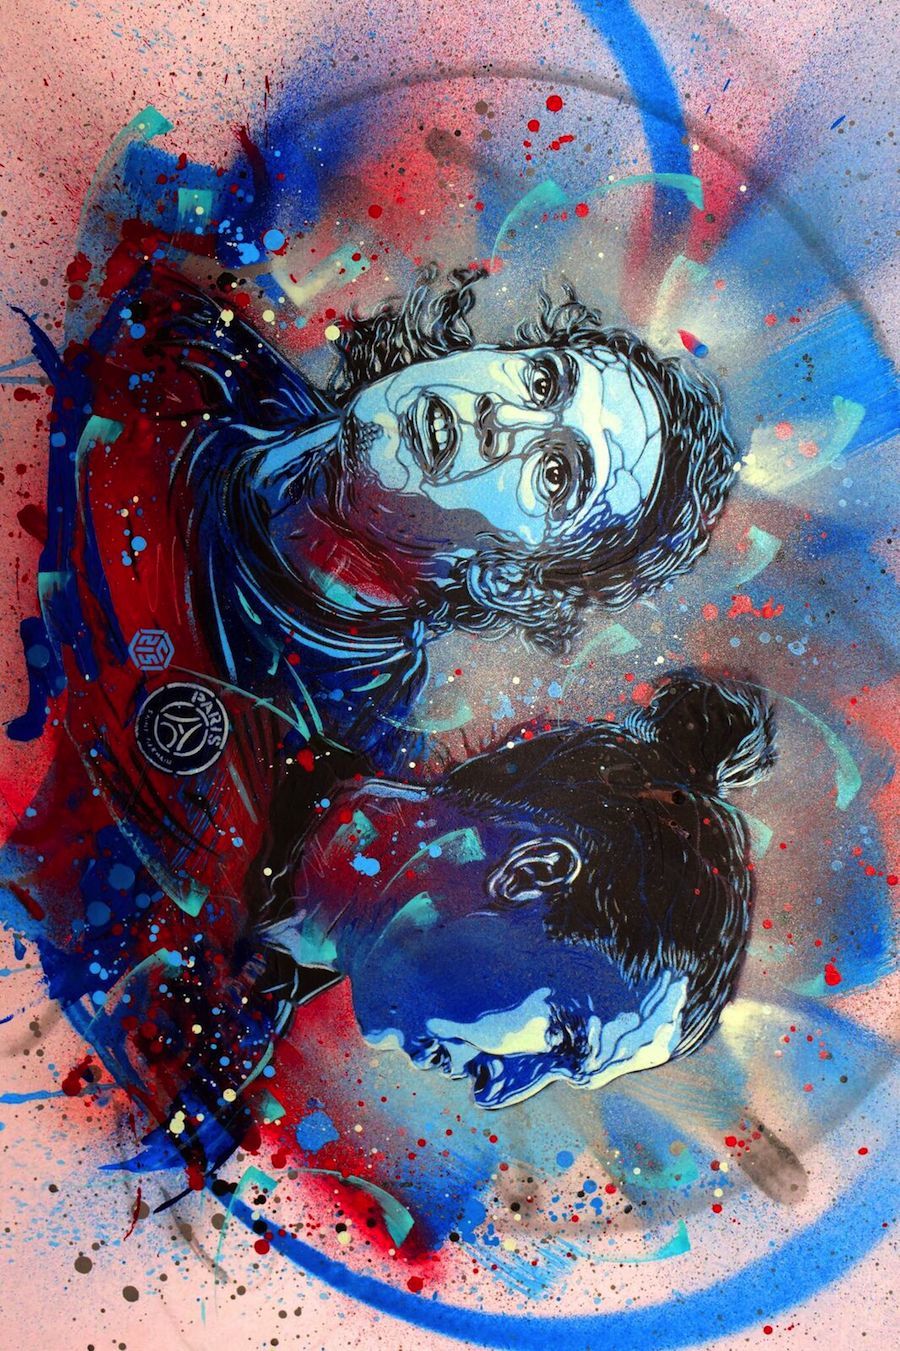 New C215 Exhibition About Athletes in Nice, France-15